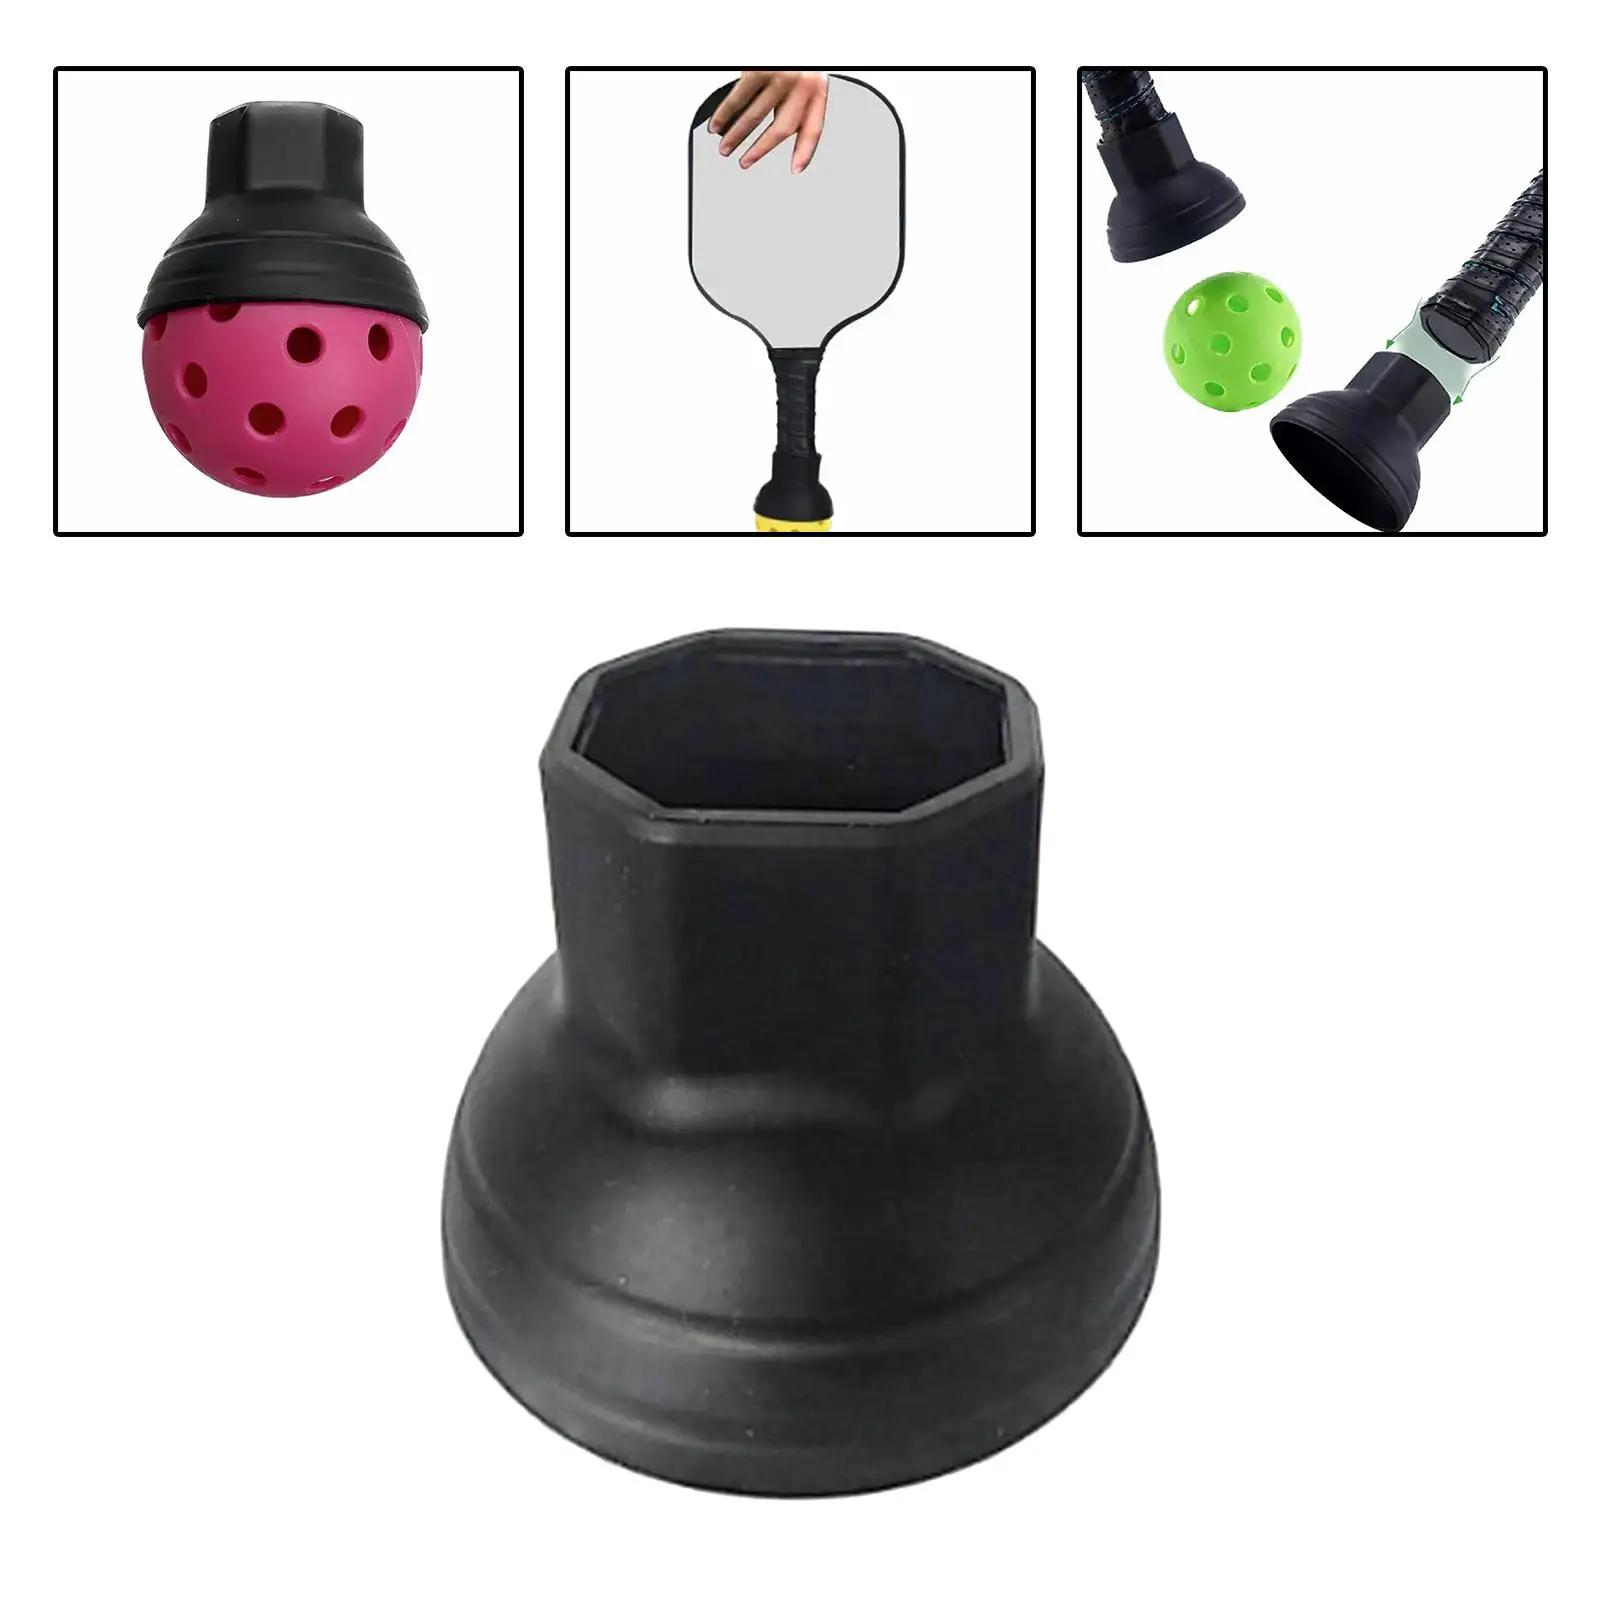 2x Pickleball Picker Picker Suction Cup without Bending over Pickup Tool Pickleball Ball Retriever for Putter Grip Training